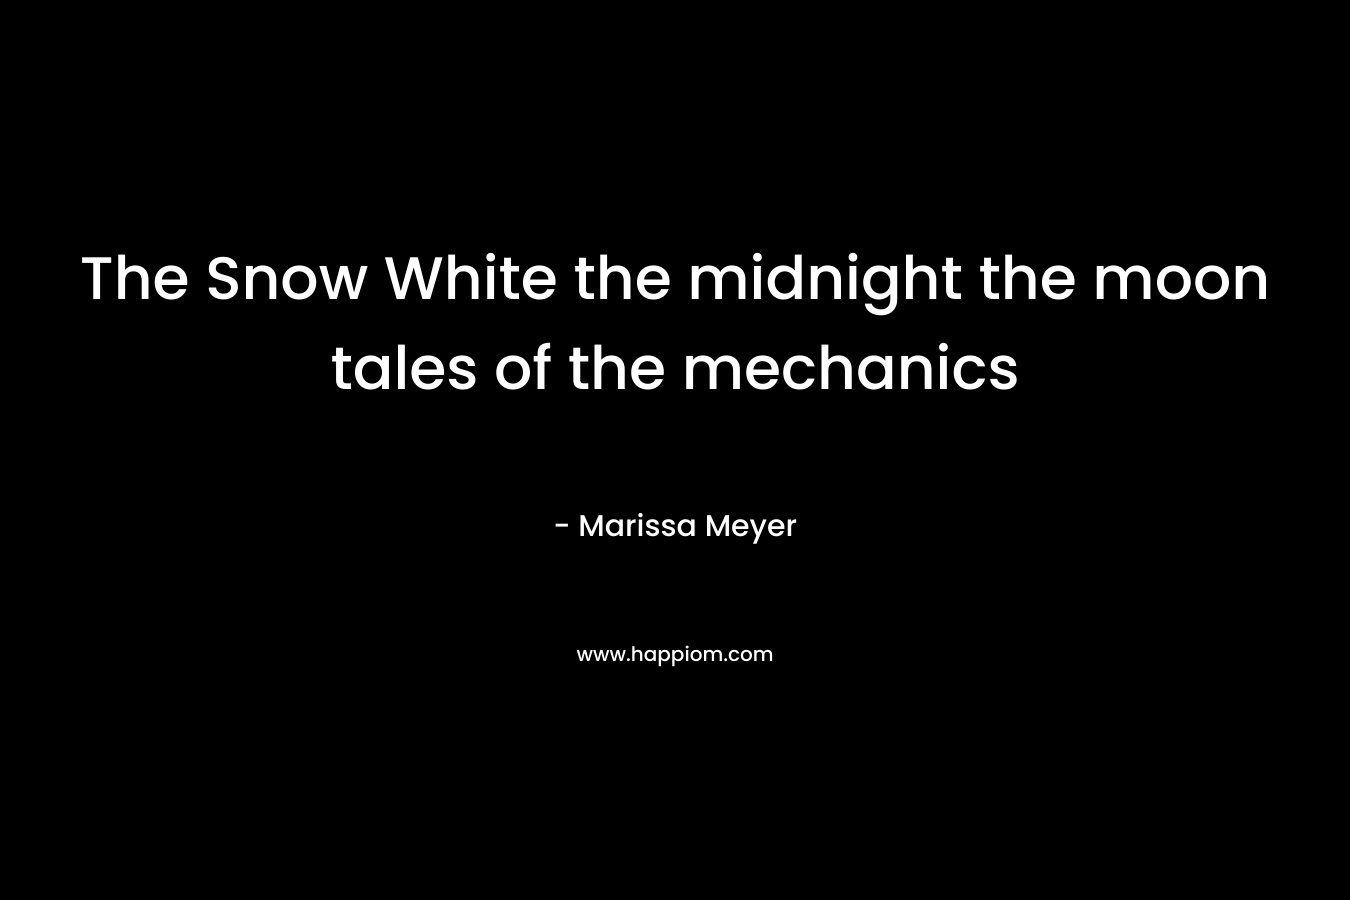 The Snow White the midnight the moon tales of the mechanics